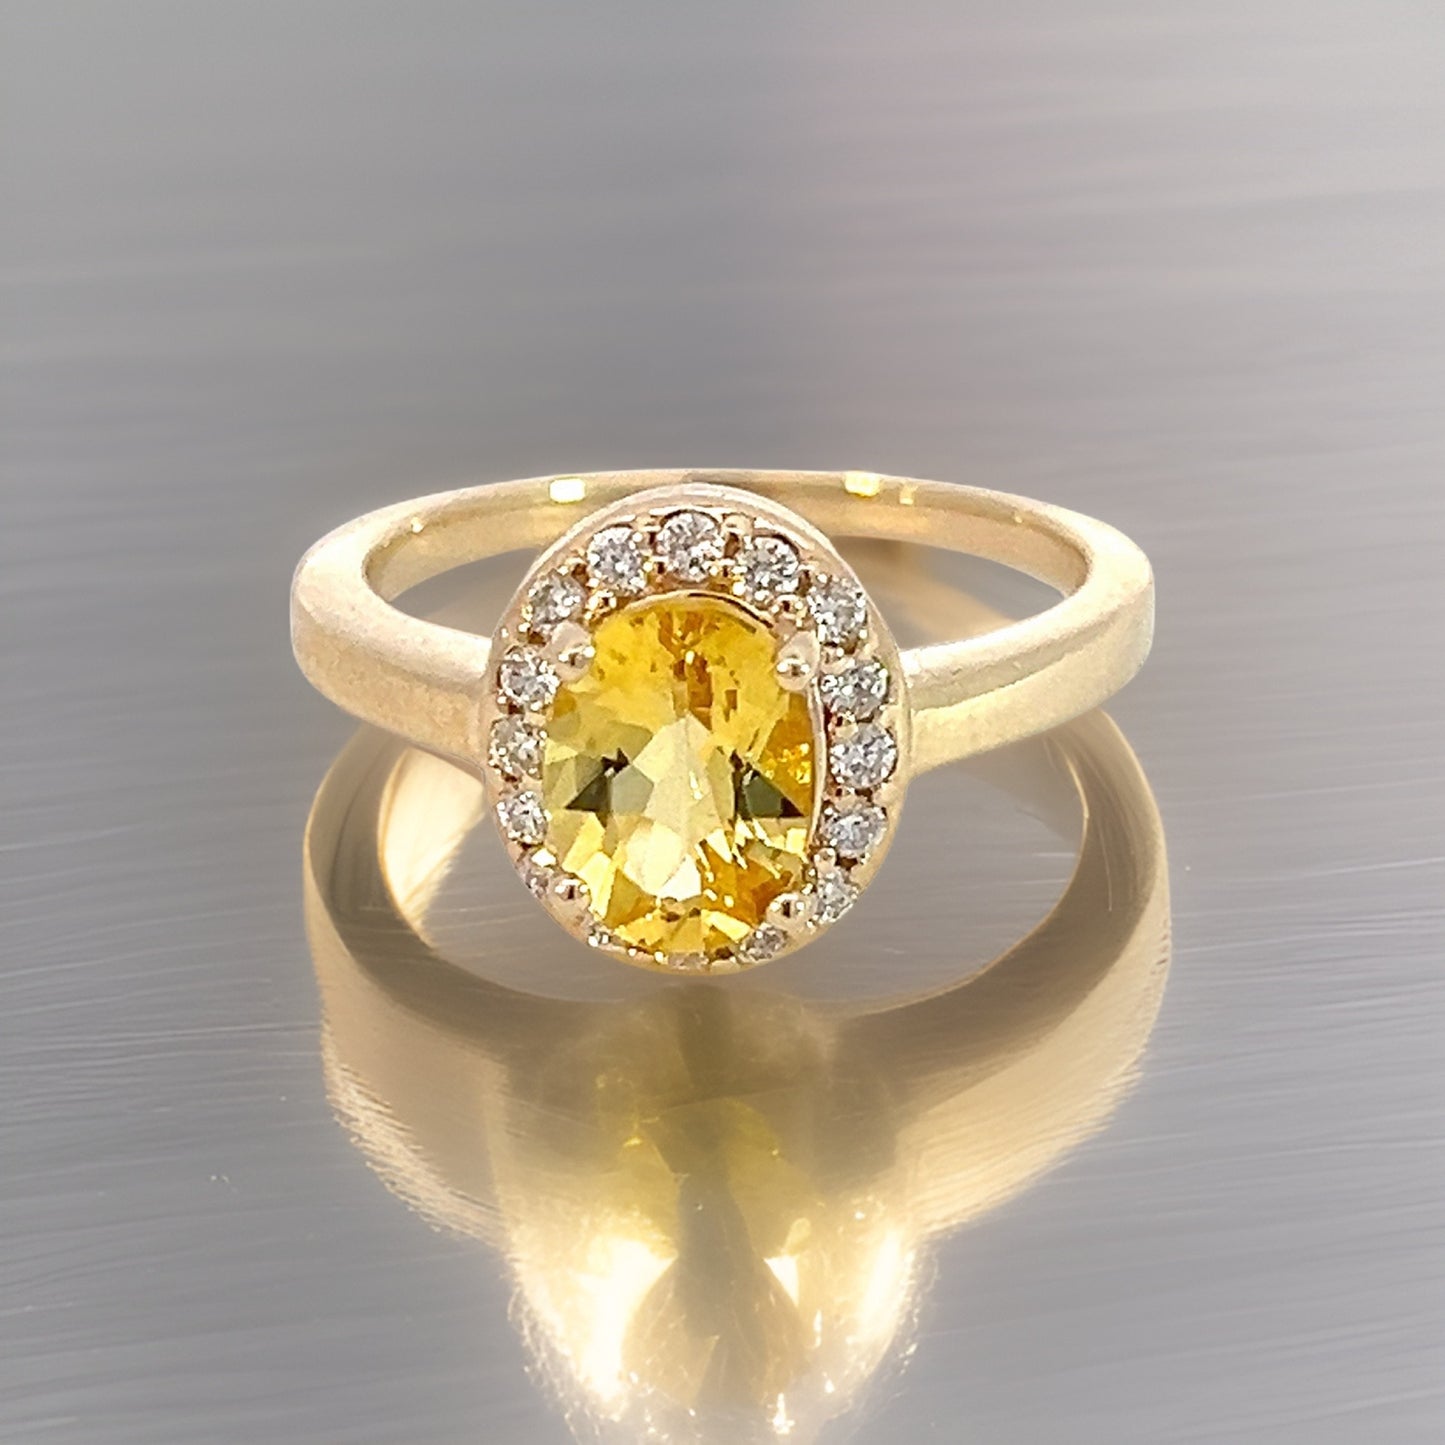 Natural Citrine Diamond Ring 6.5 14k Yellow Gold 1.74 TCW Certified $2,950 310693